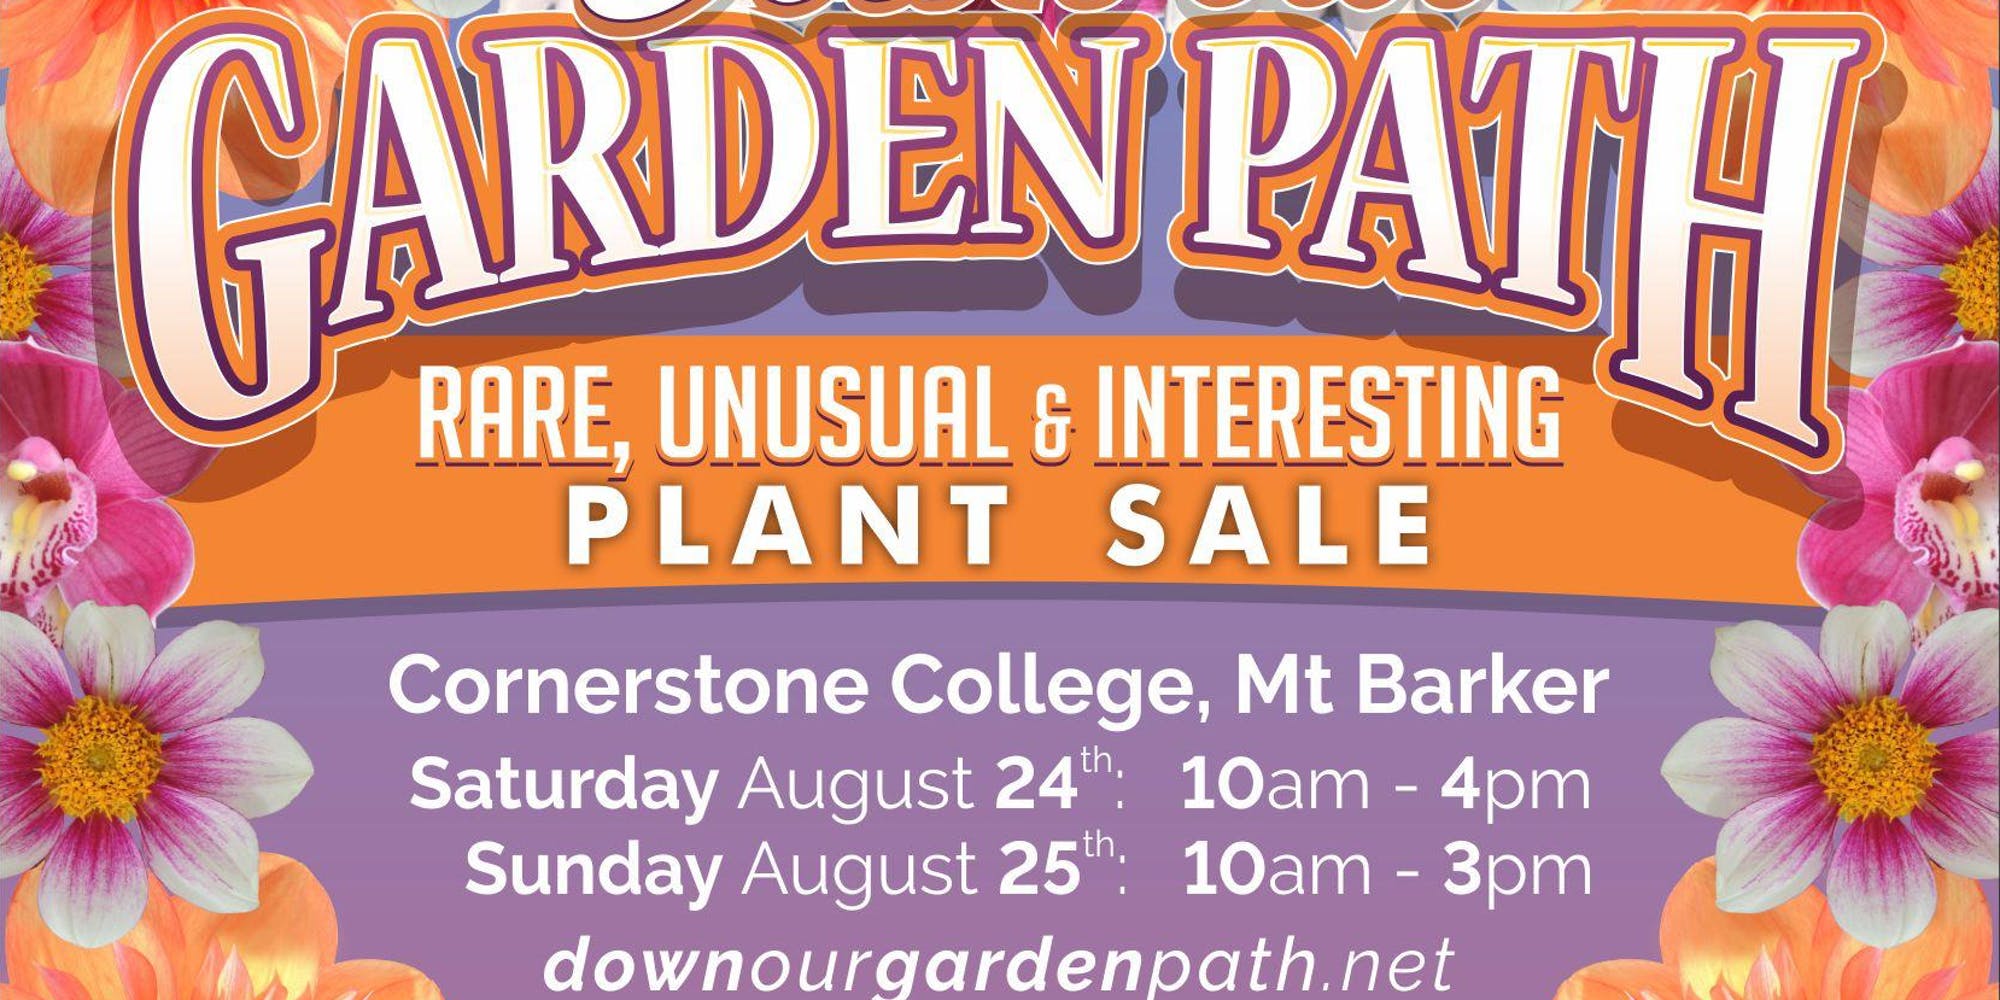 Down Our Garden Path:  Rare, Unusual and Interesting Plant Sale